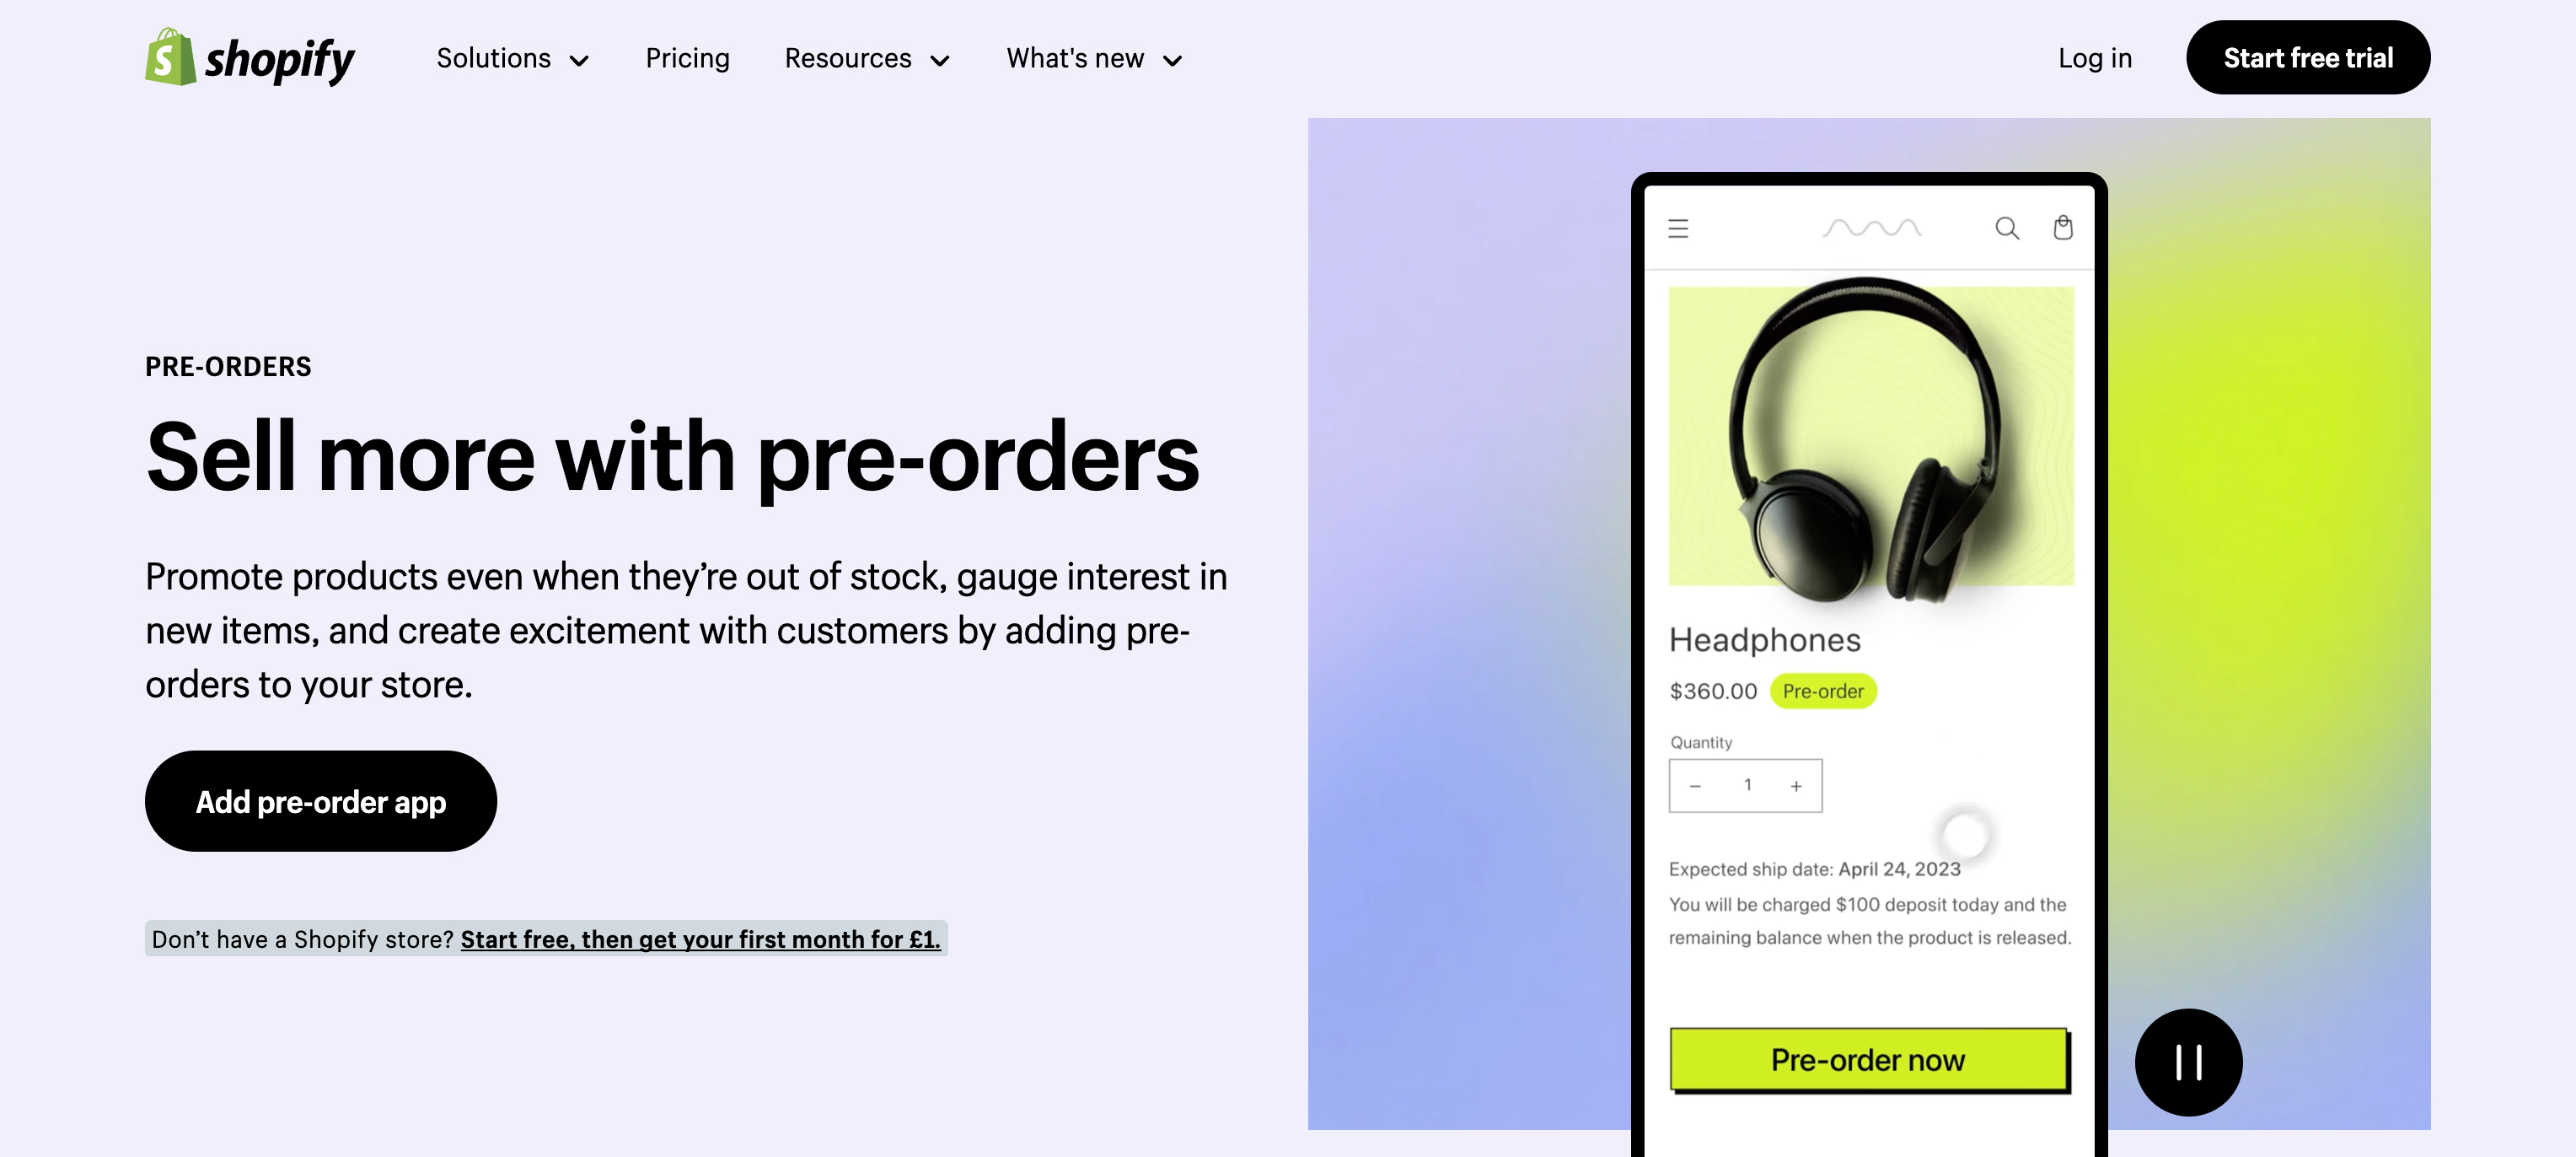 Shopify's official pre-order landing page for how to increase Shopify sales